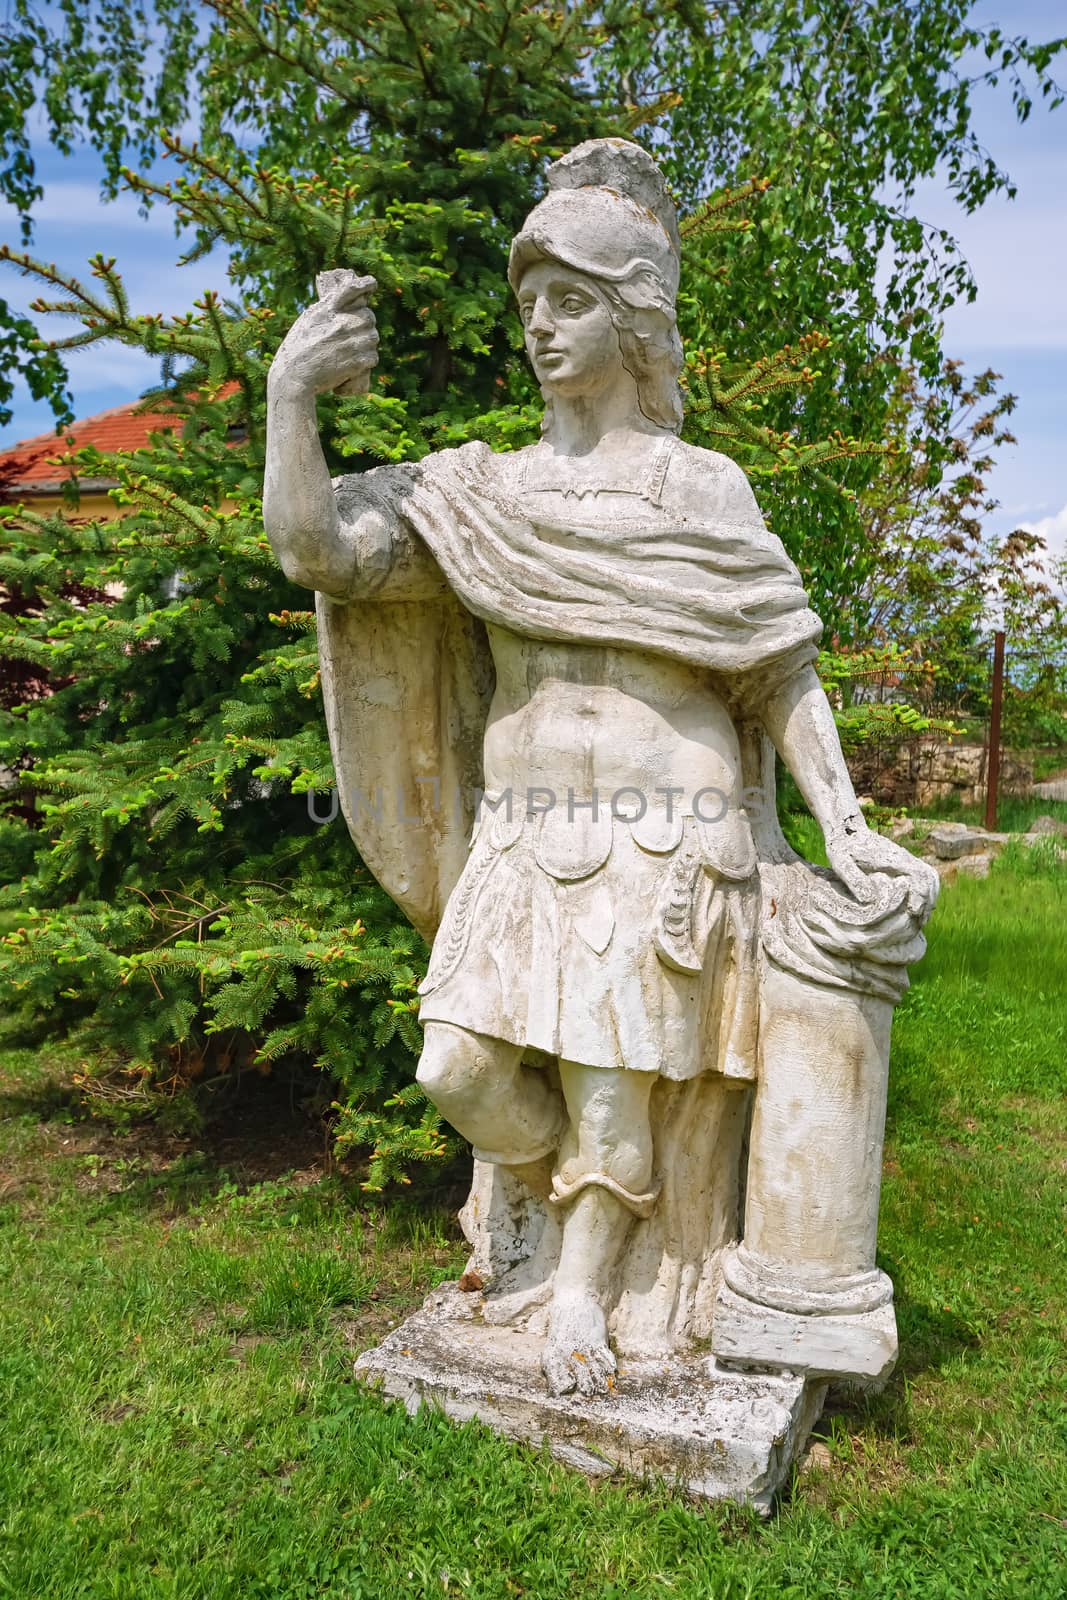 Old Statue of an Roman Hero in the Garden